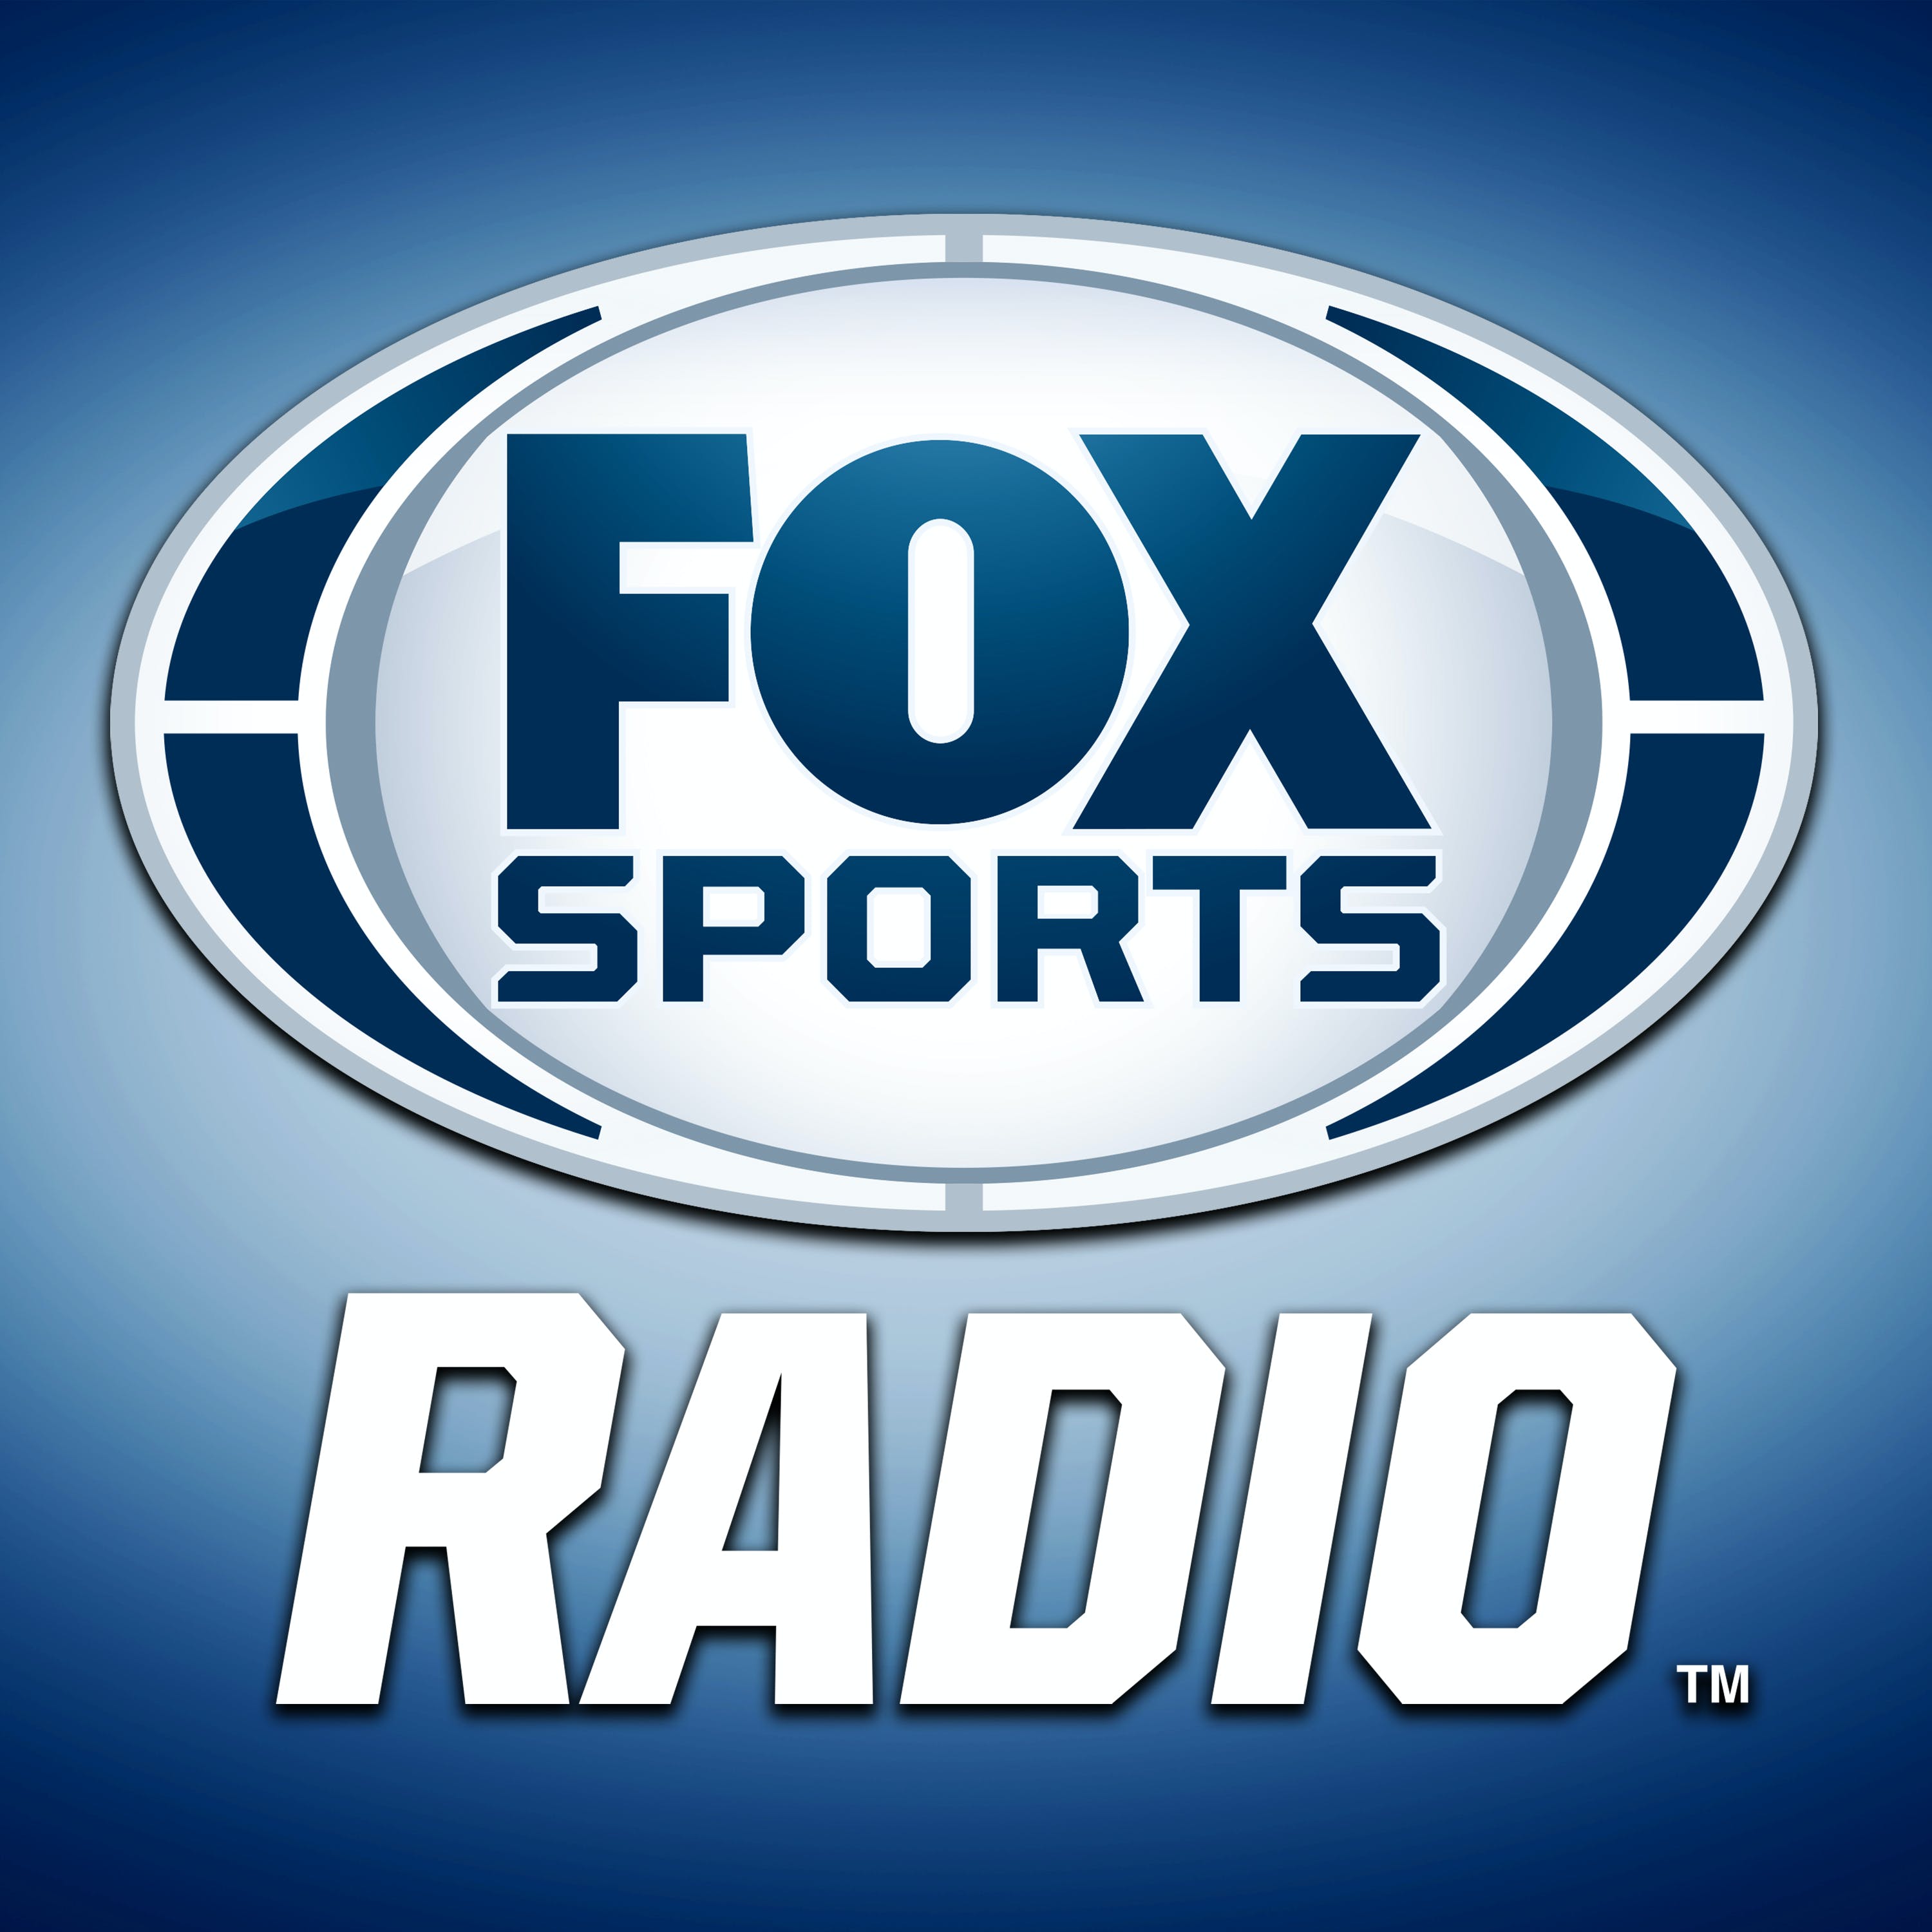 05/15/2021 - Up On Game - Hour 1 - Does Tebow Deserve This Opportunity? Guest - Todd Fuhrman, Fox Bet Live